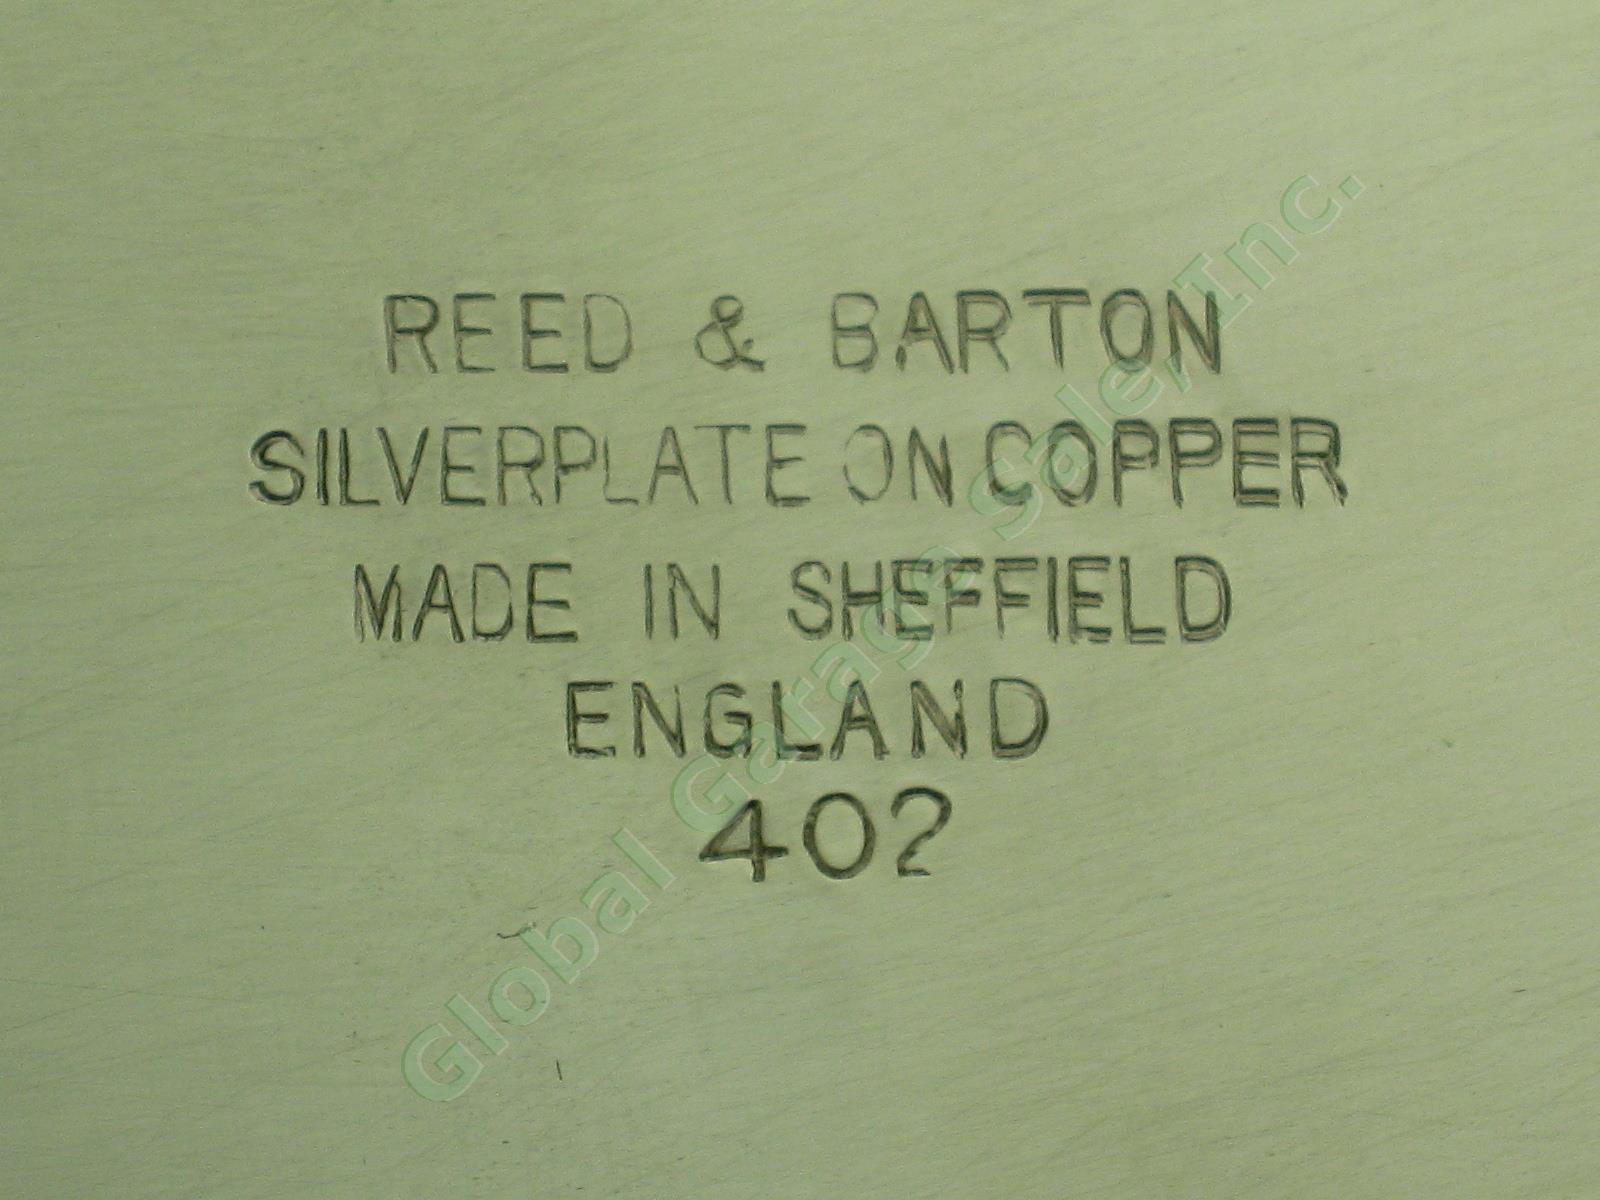 Reed & Barton Footed Silver Plate On Copper Gallery Tray Sheffield England 402 5